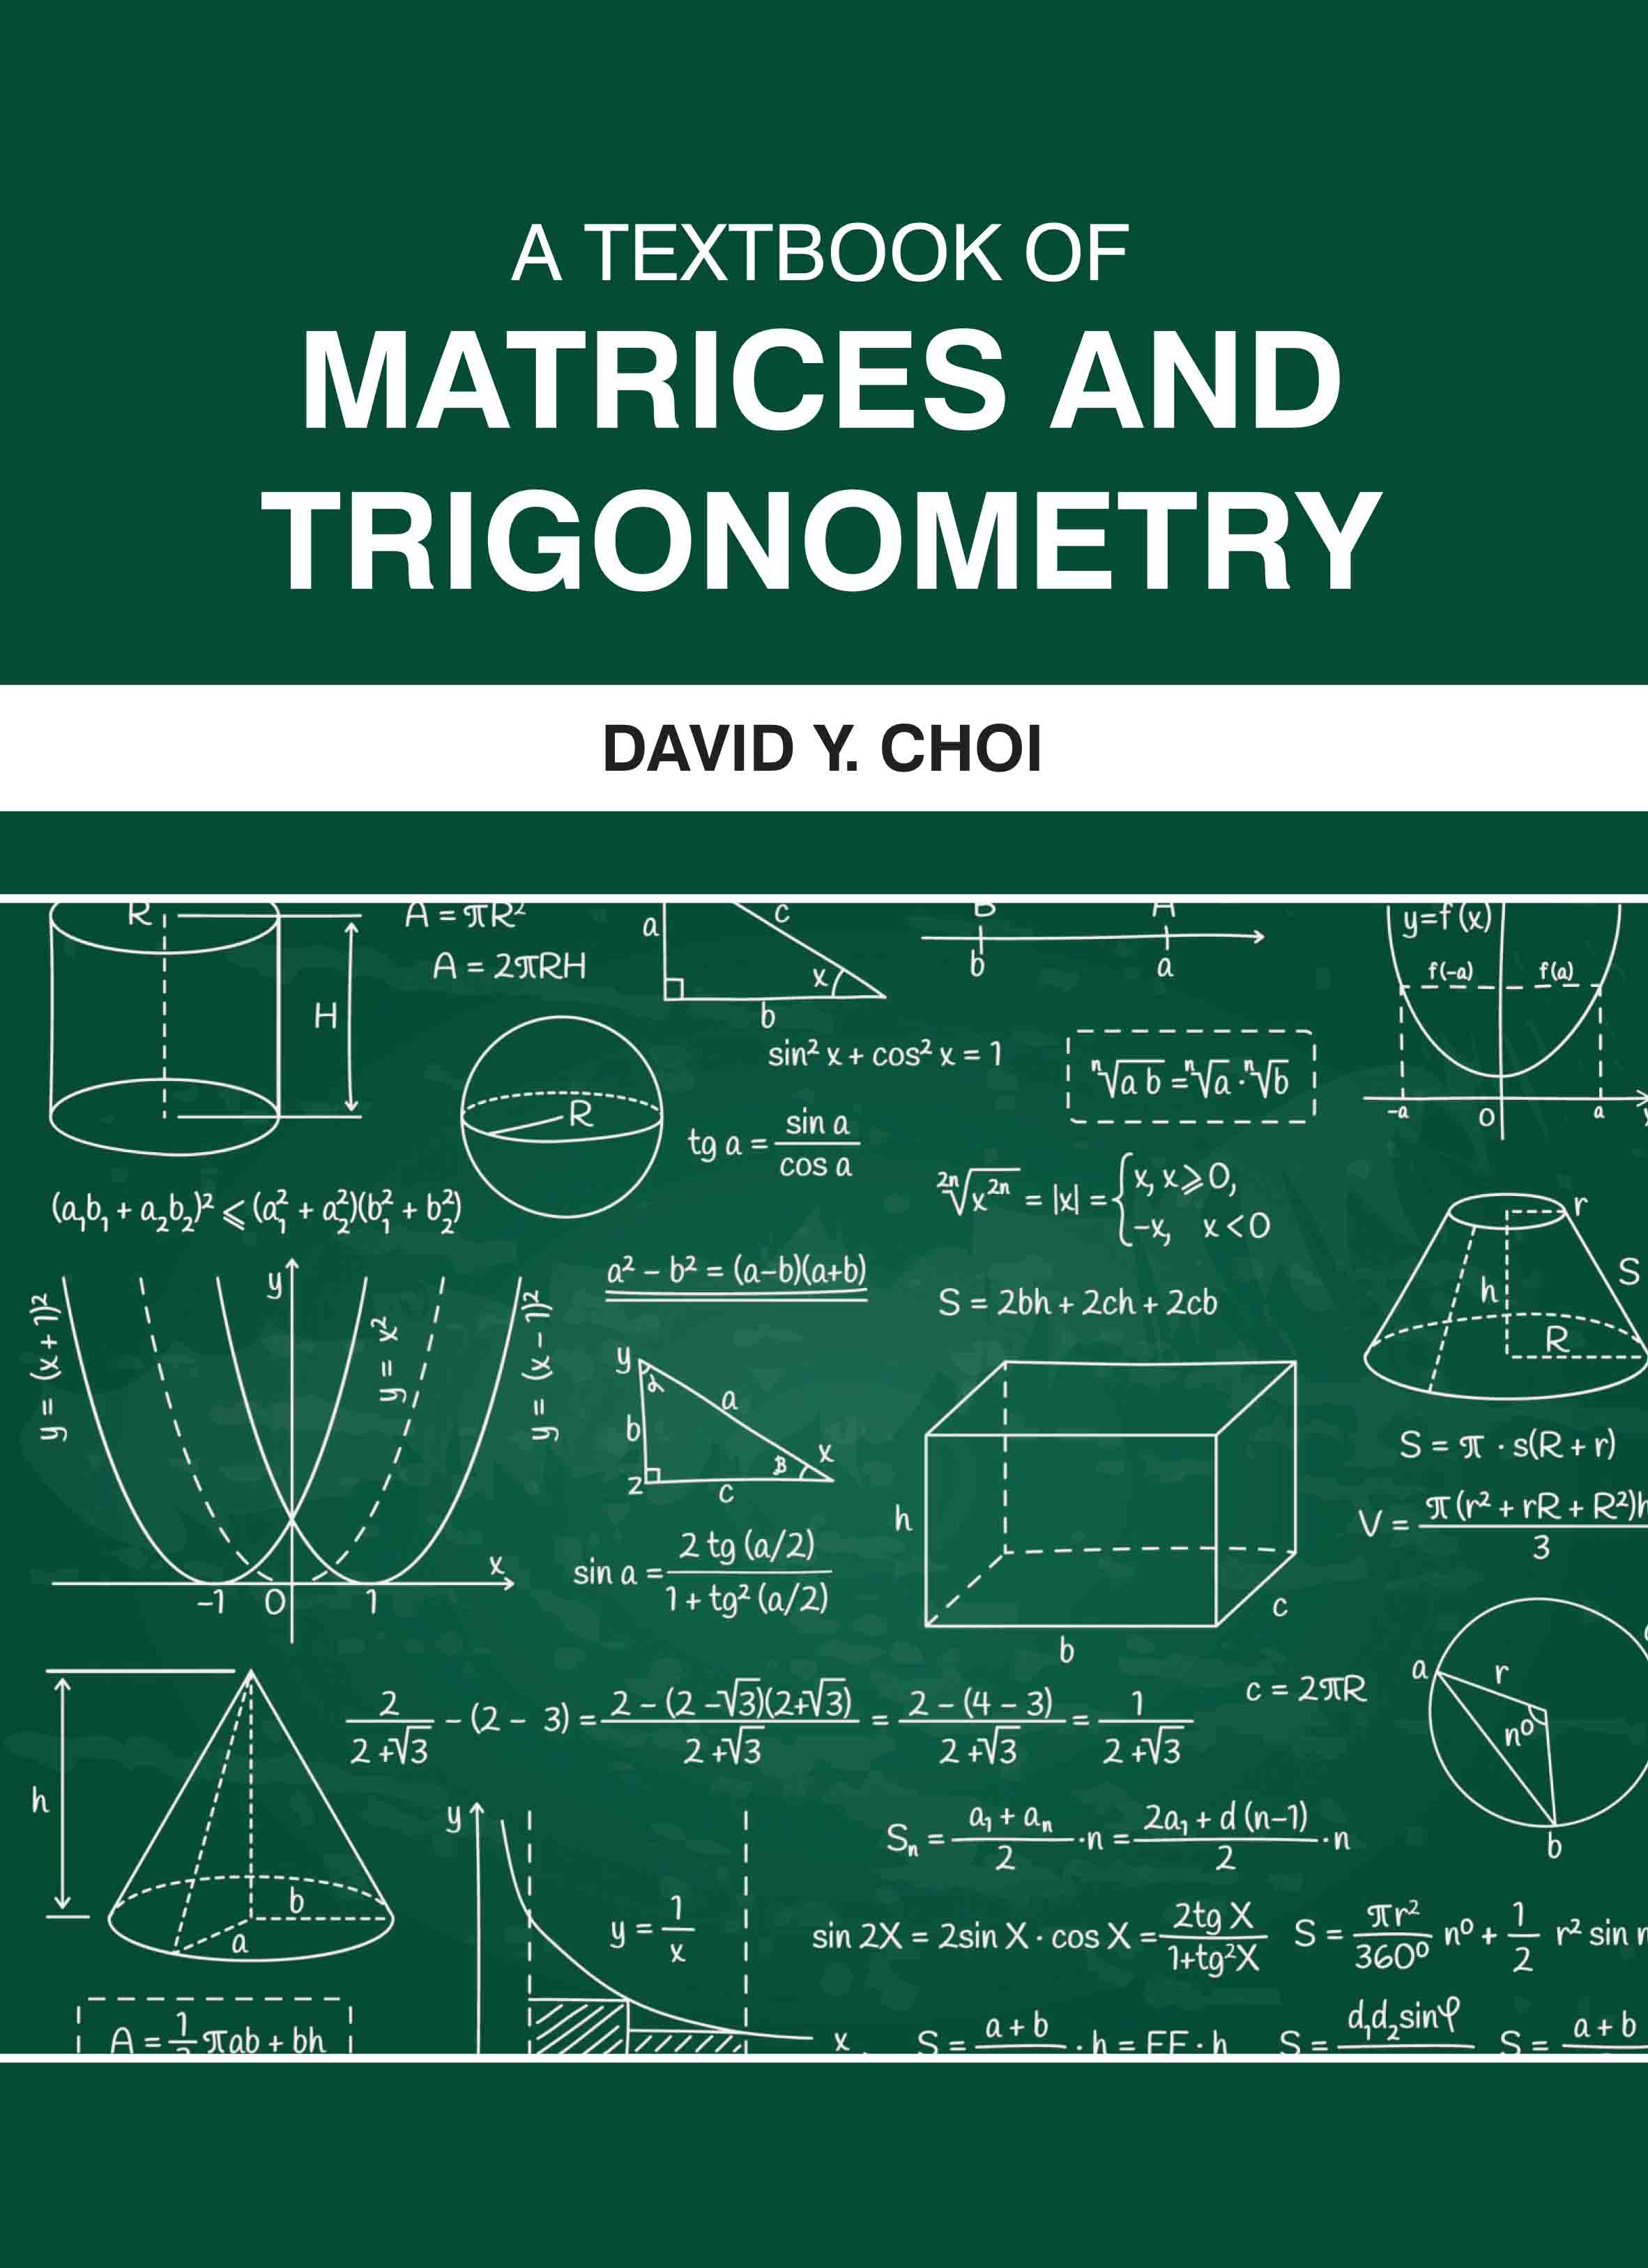 A Textbook of Matrices and Trigonometry